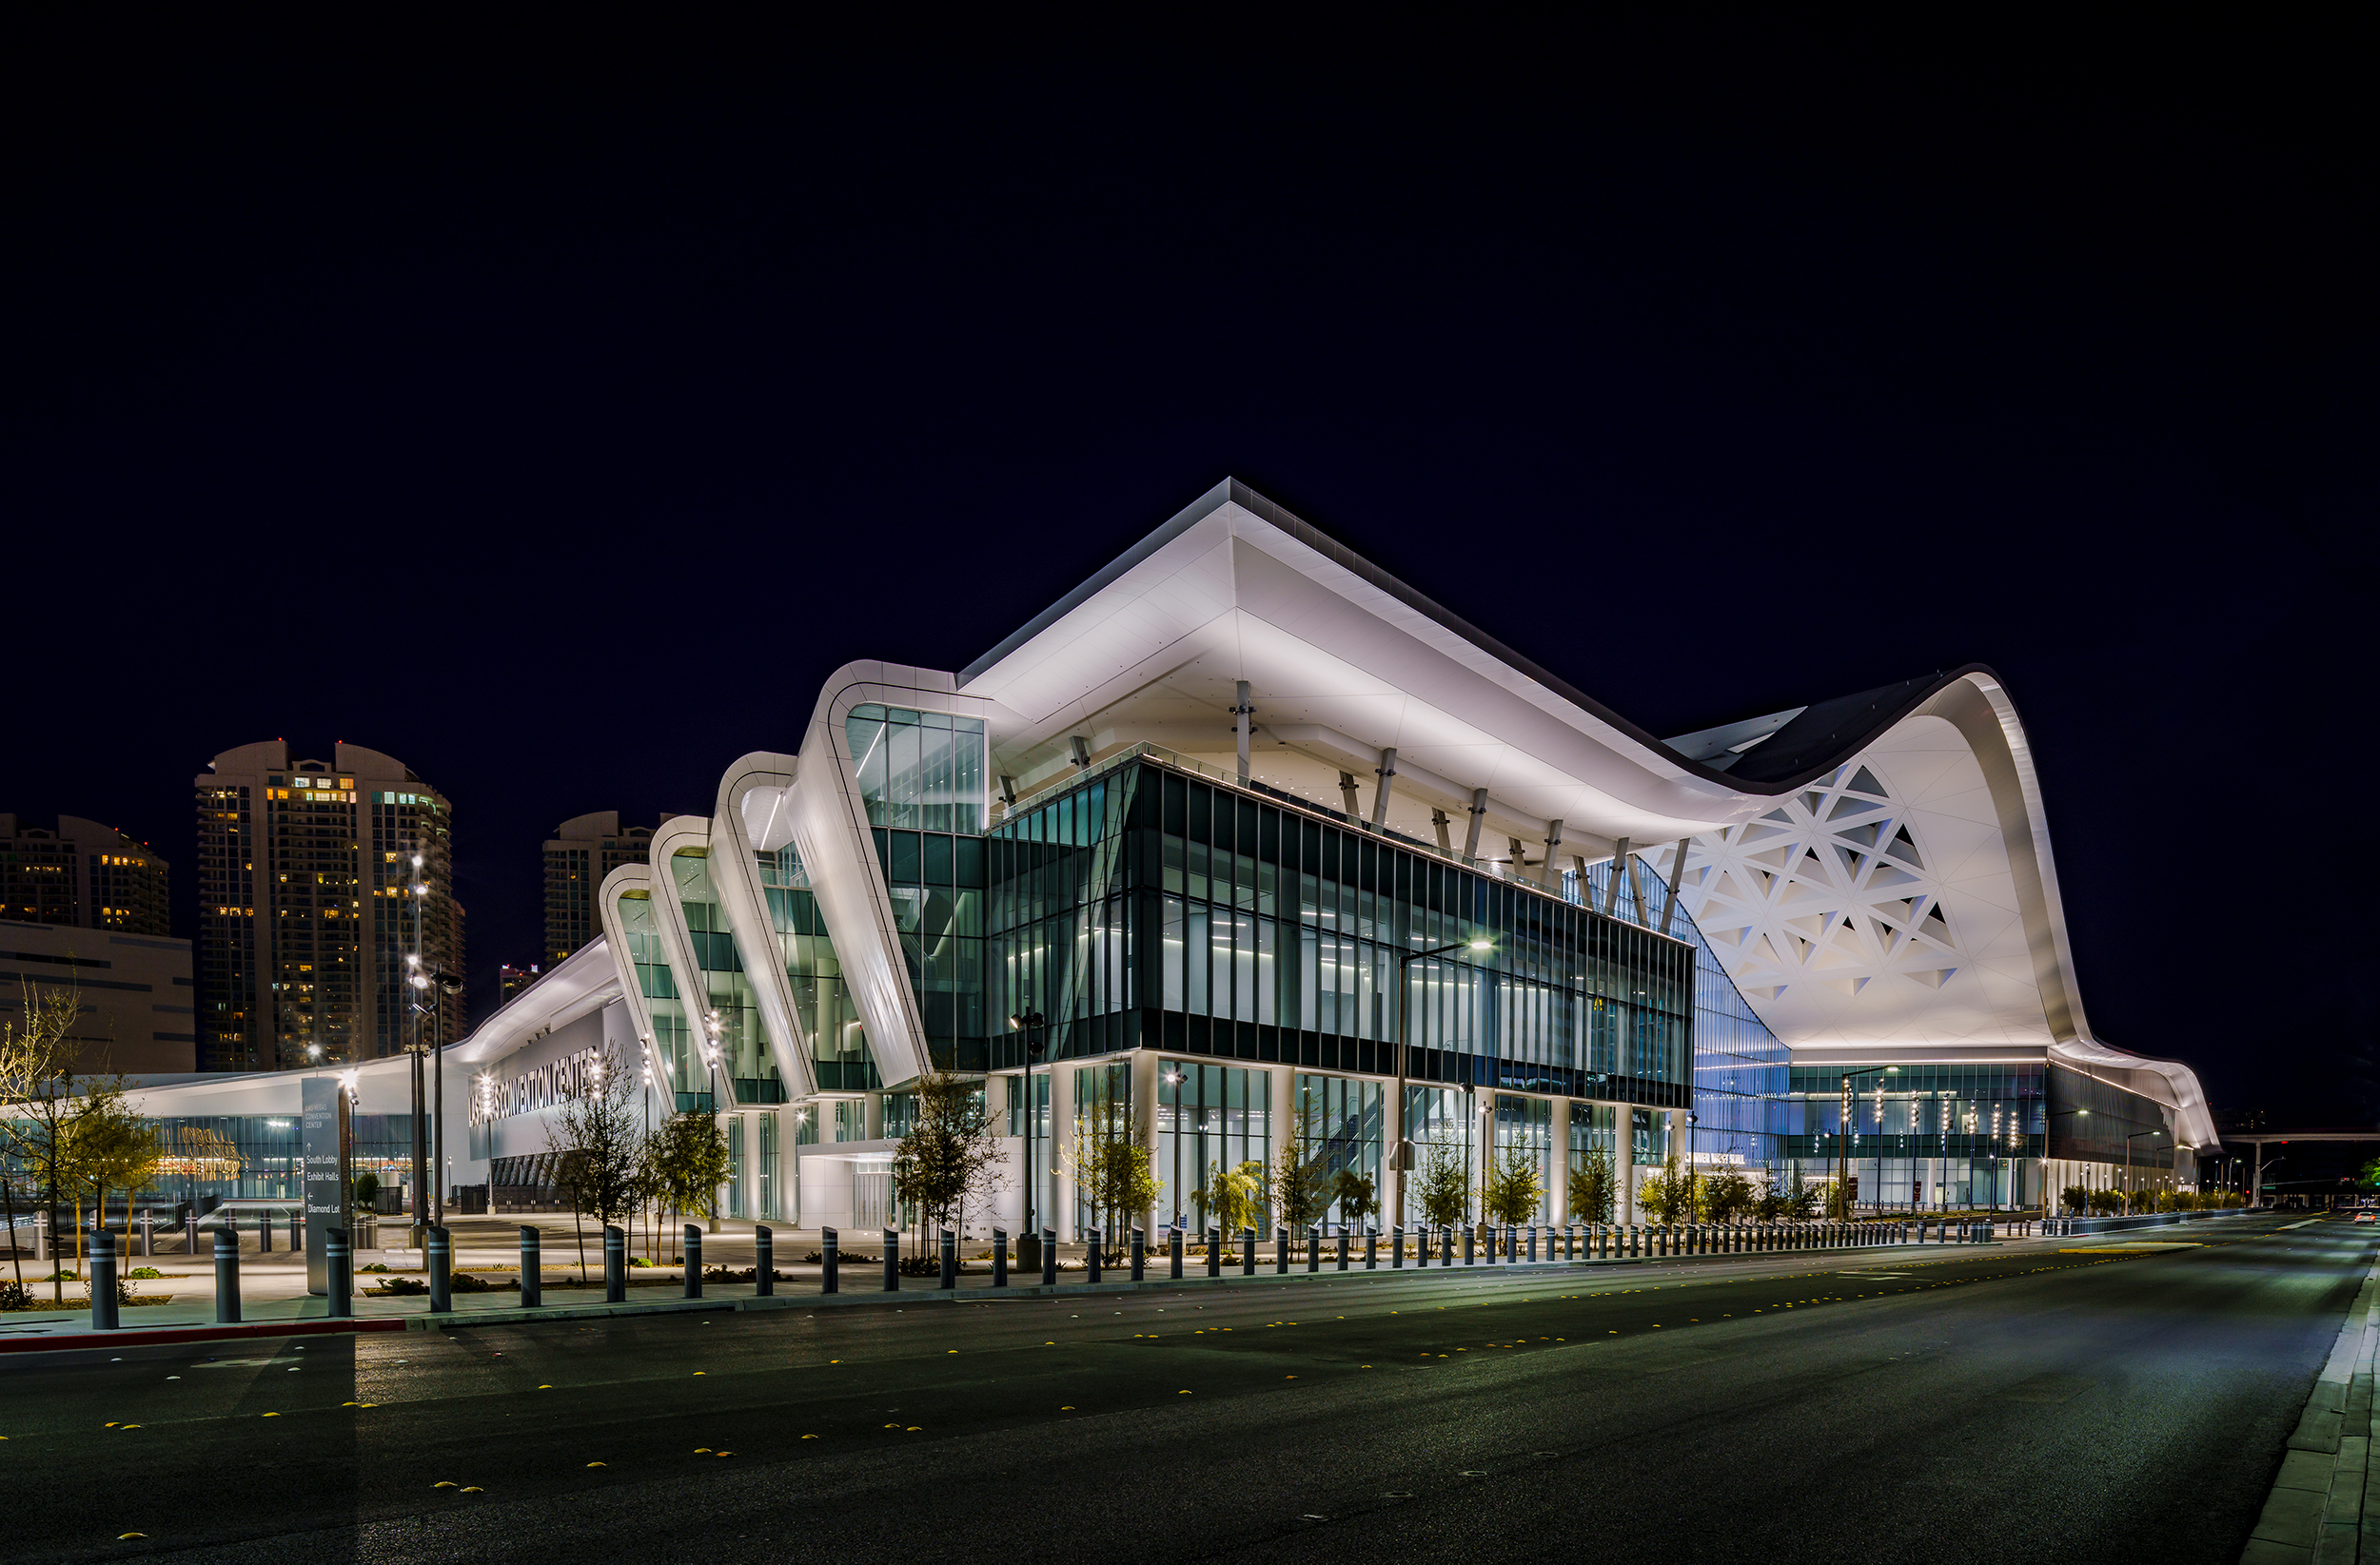 The $1 billion Las Vegas Convention Center West Hall expansion as seen at night 